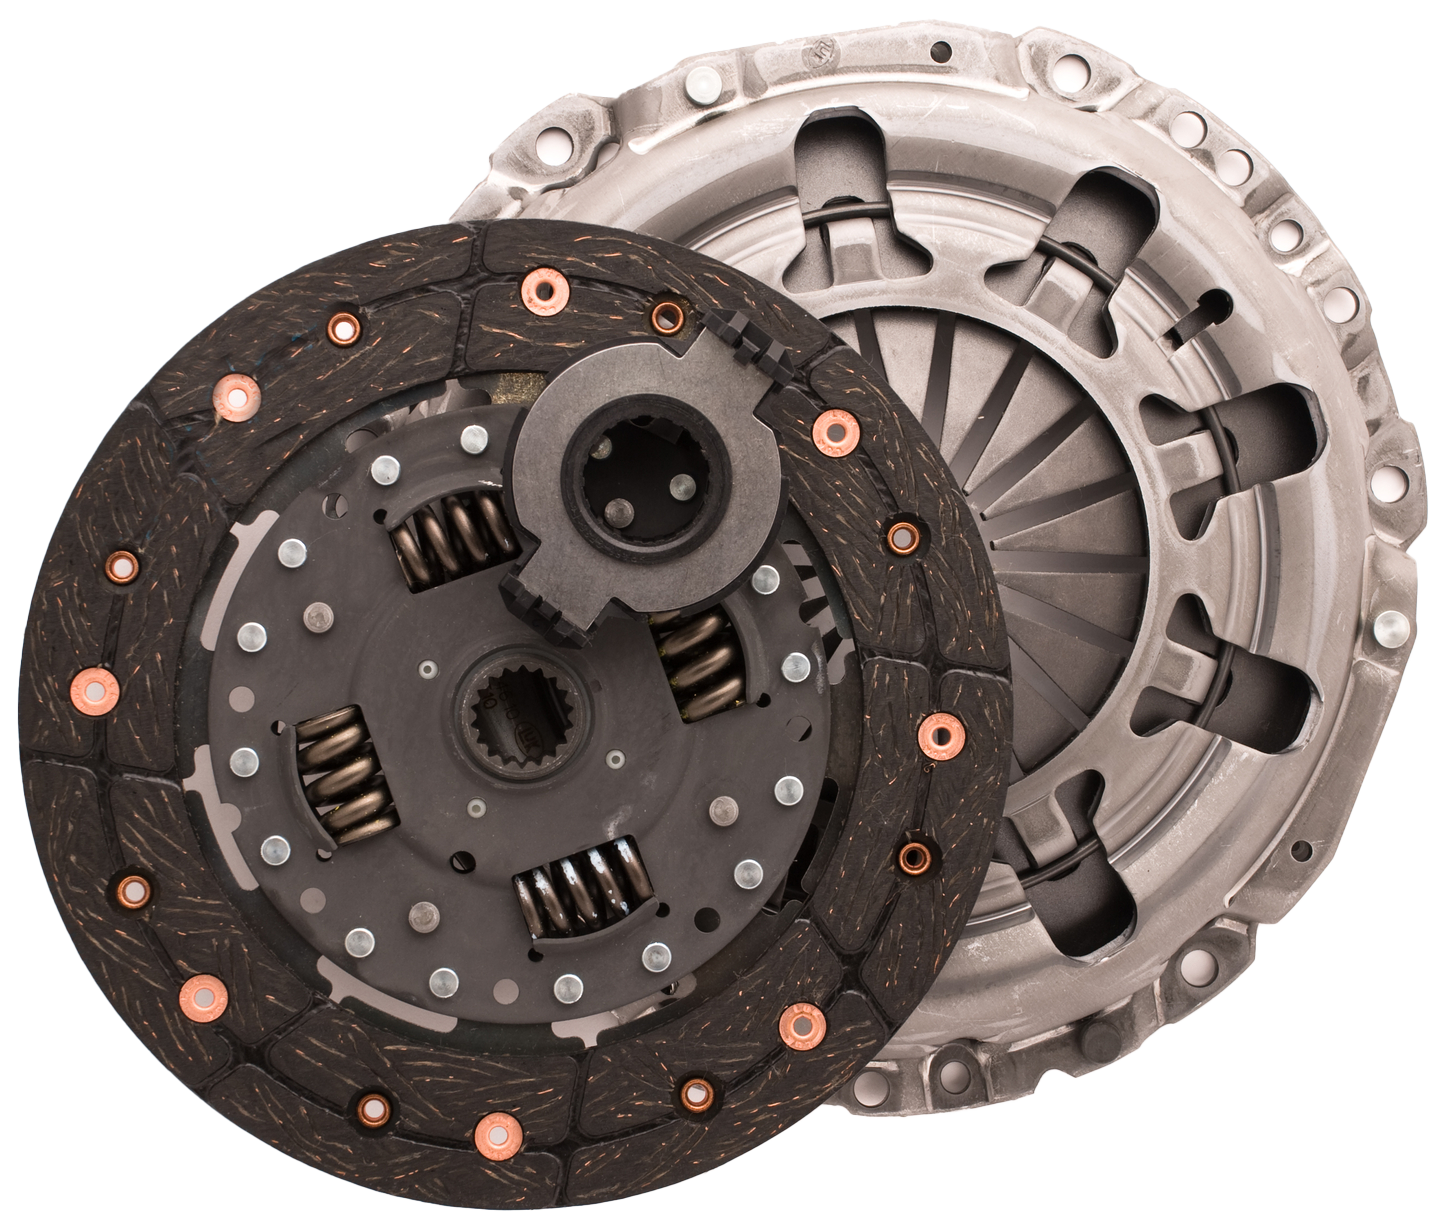 Car engine clutch. Isolated